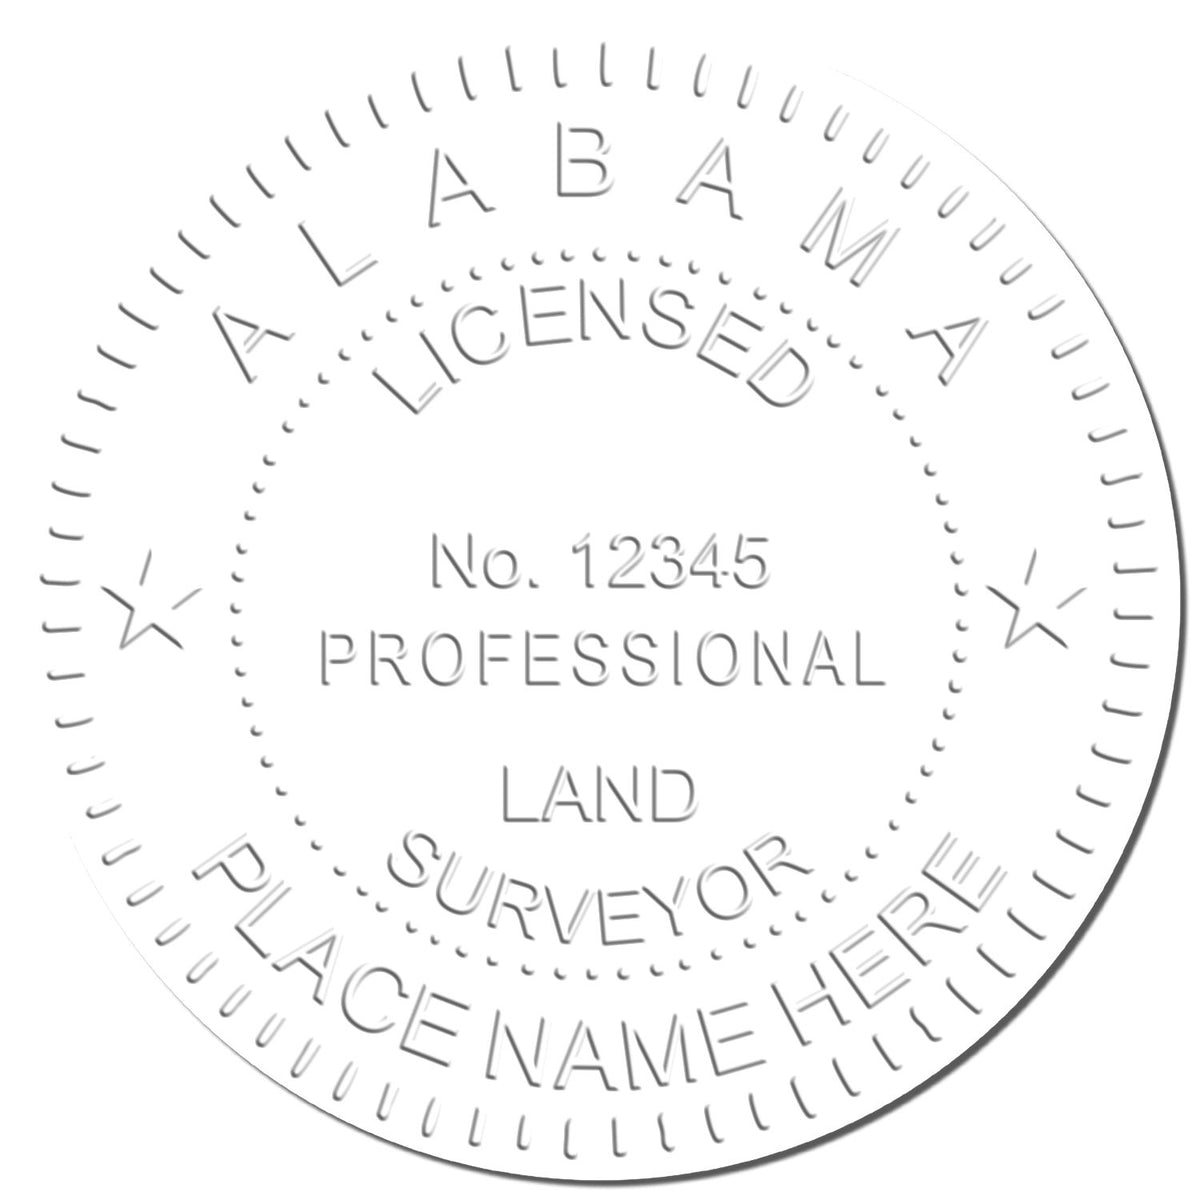 This paper is stamped with a sample imprint of the Extended Long Reach Alabama Surveyor Embosser, signifying its quality and reliability.